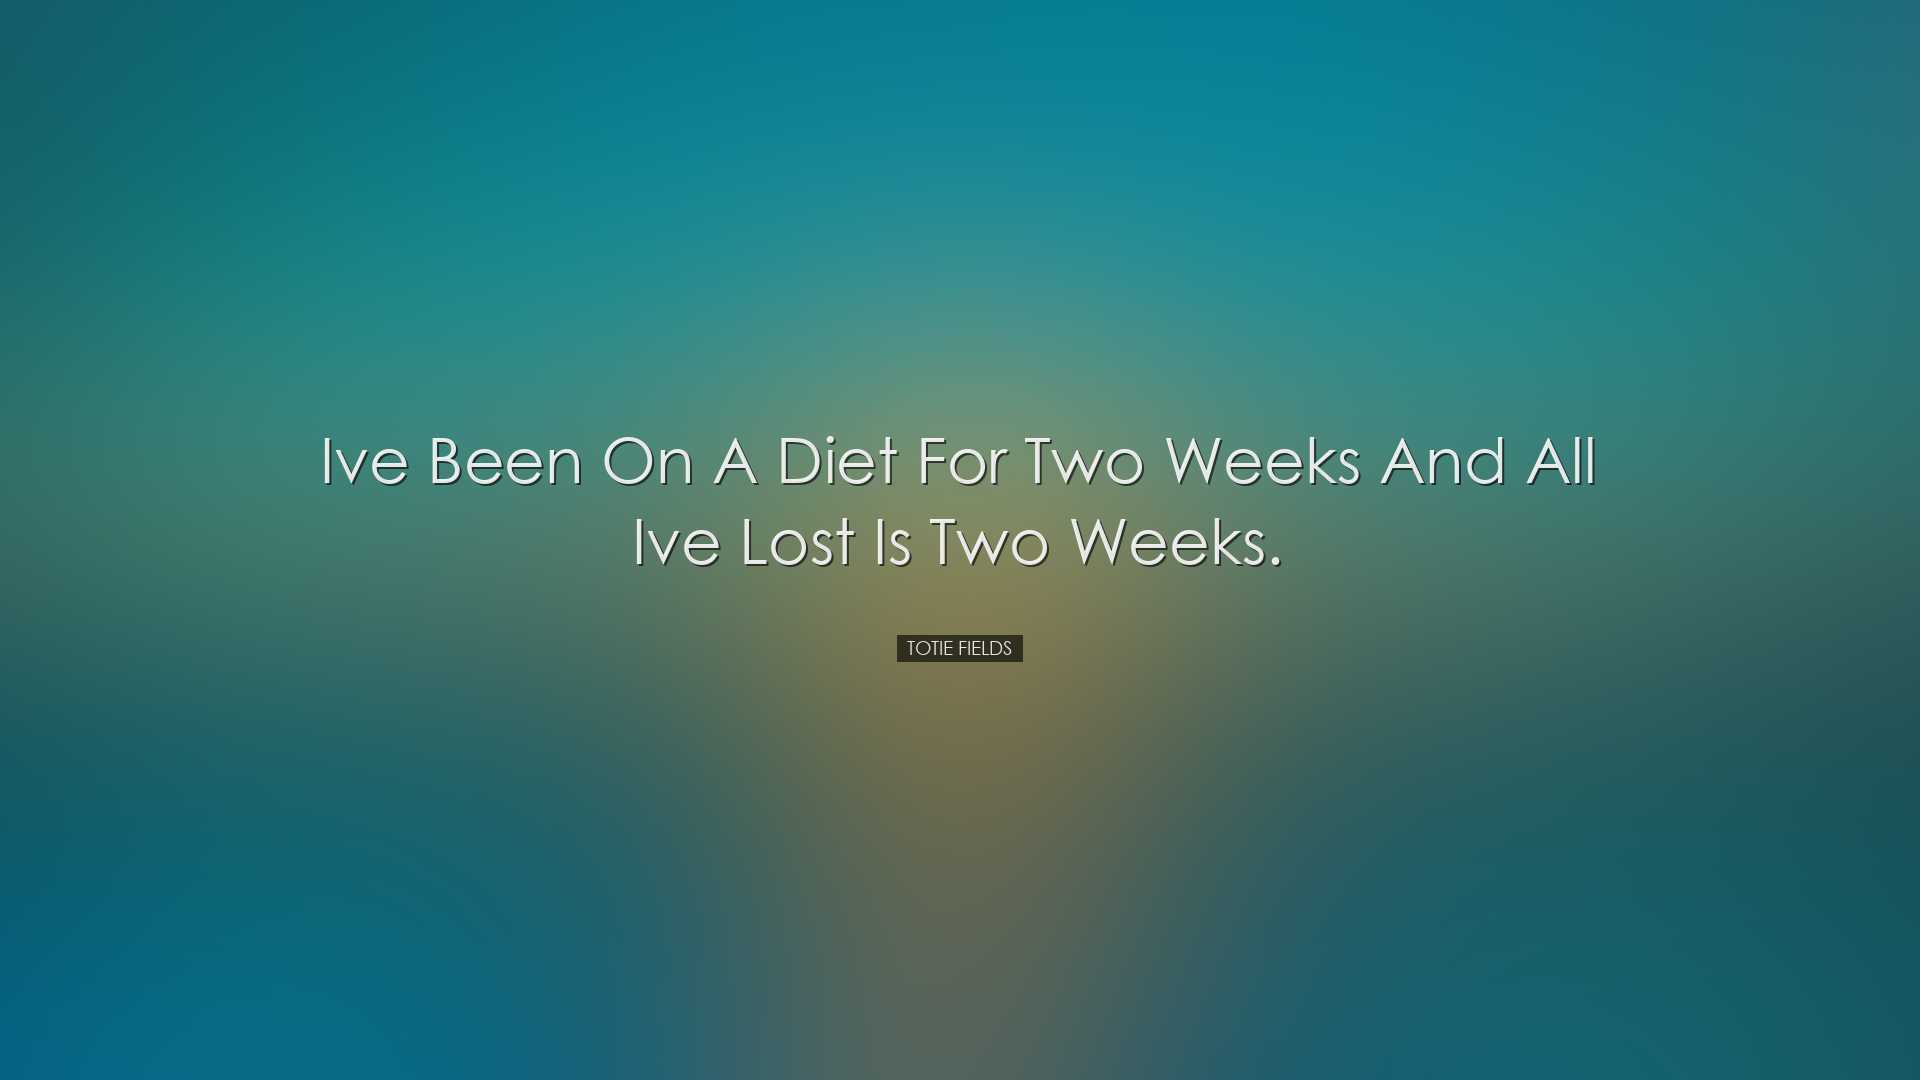 Ive been on a diet for two weeks and all Ive lost is two weeks. -